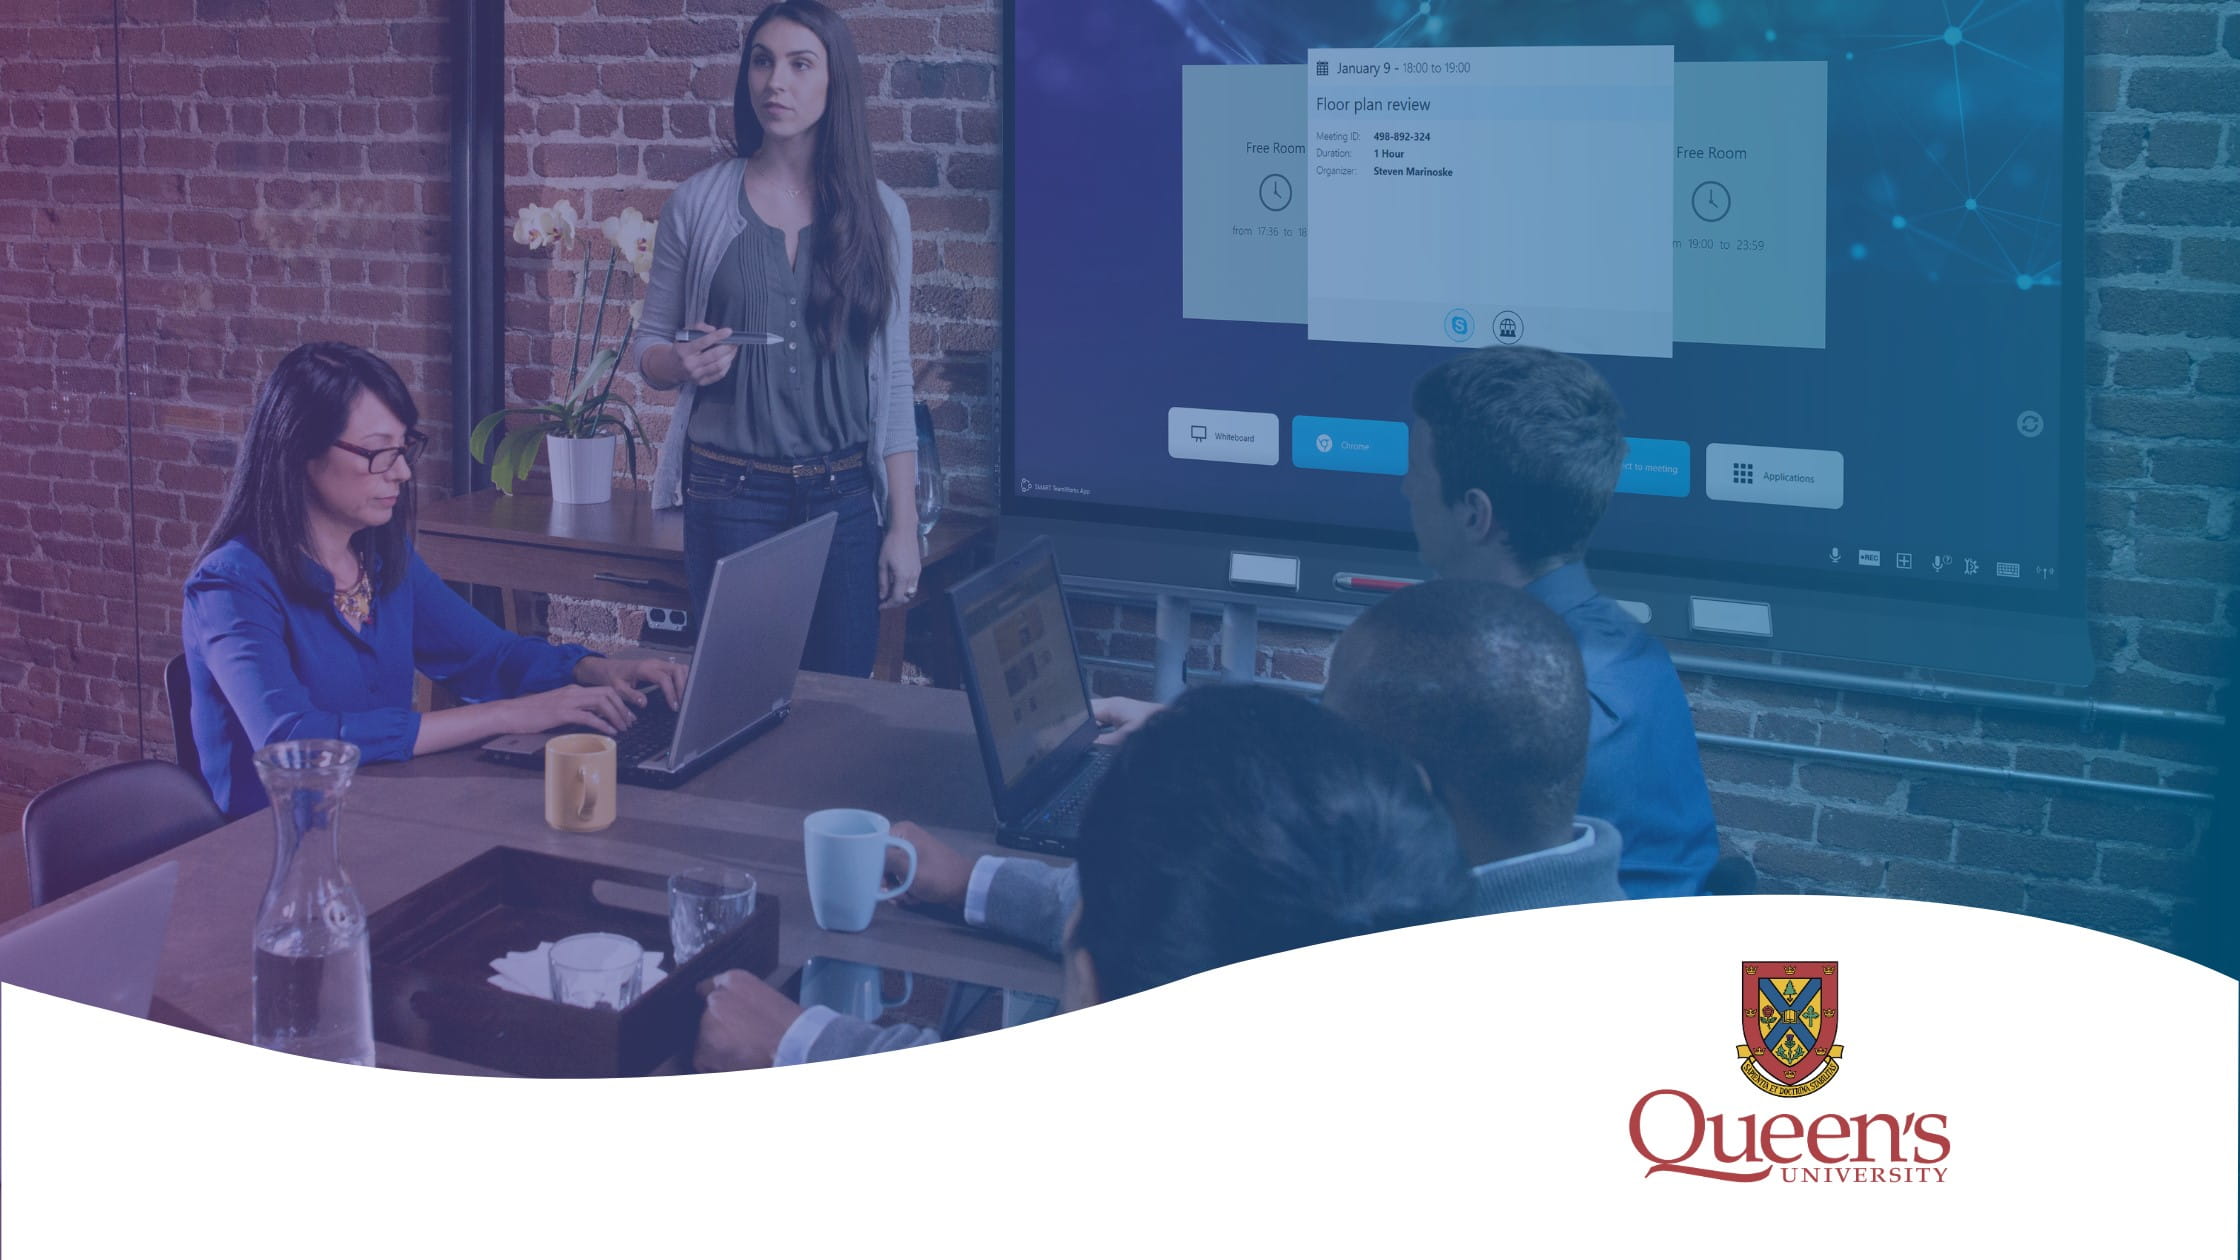 A team of researchers collaborating infront of a SMART Board. There is an opaque purple and blue screen above the image and the Queens University logo sits in the bottom right corner of the image.